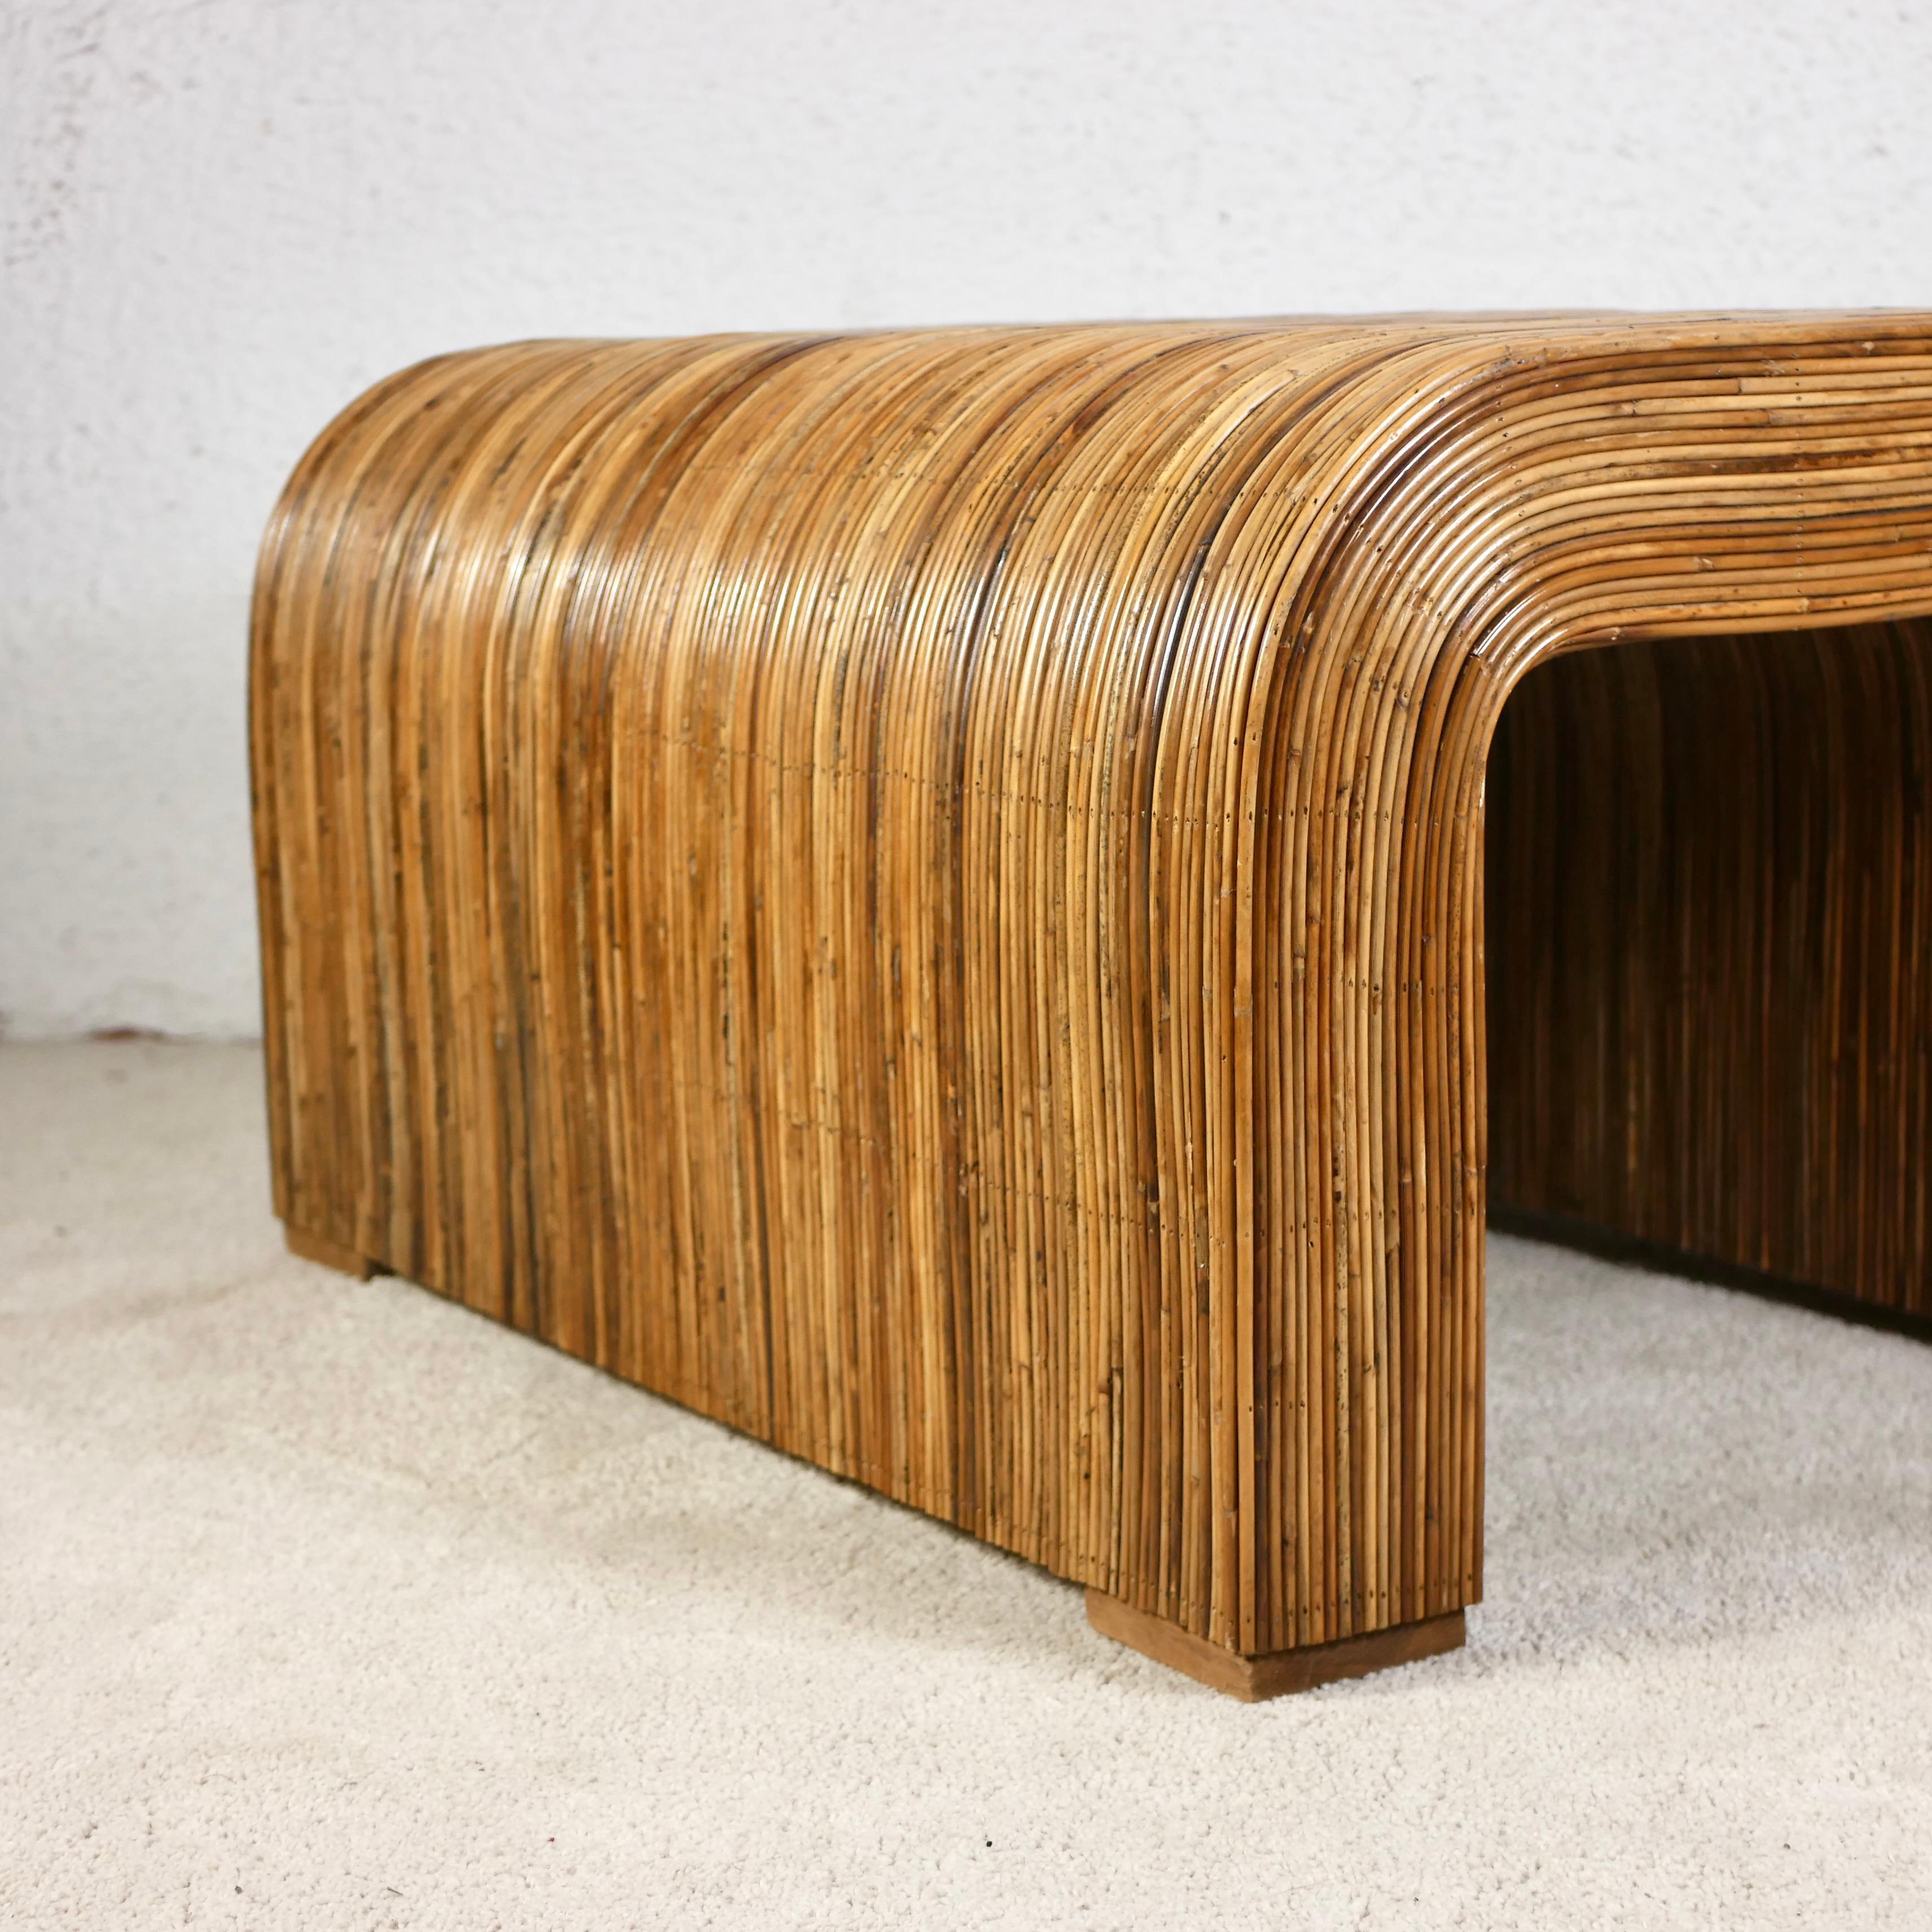 Italian Rattan waterfall coffee / side table or bench, made in Italy, 1960s